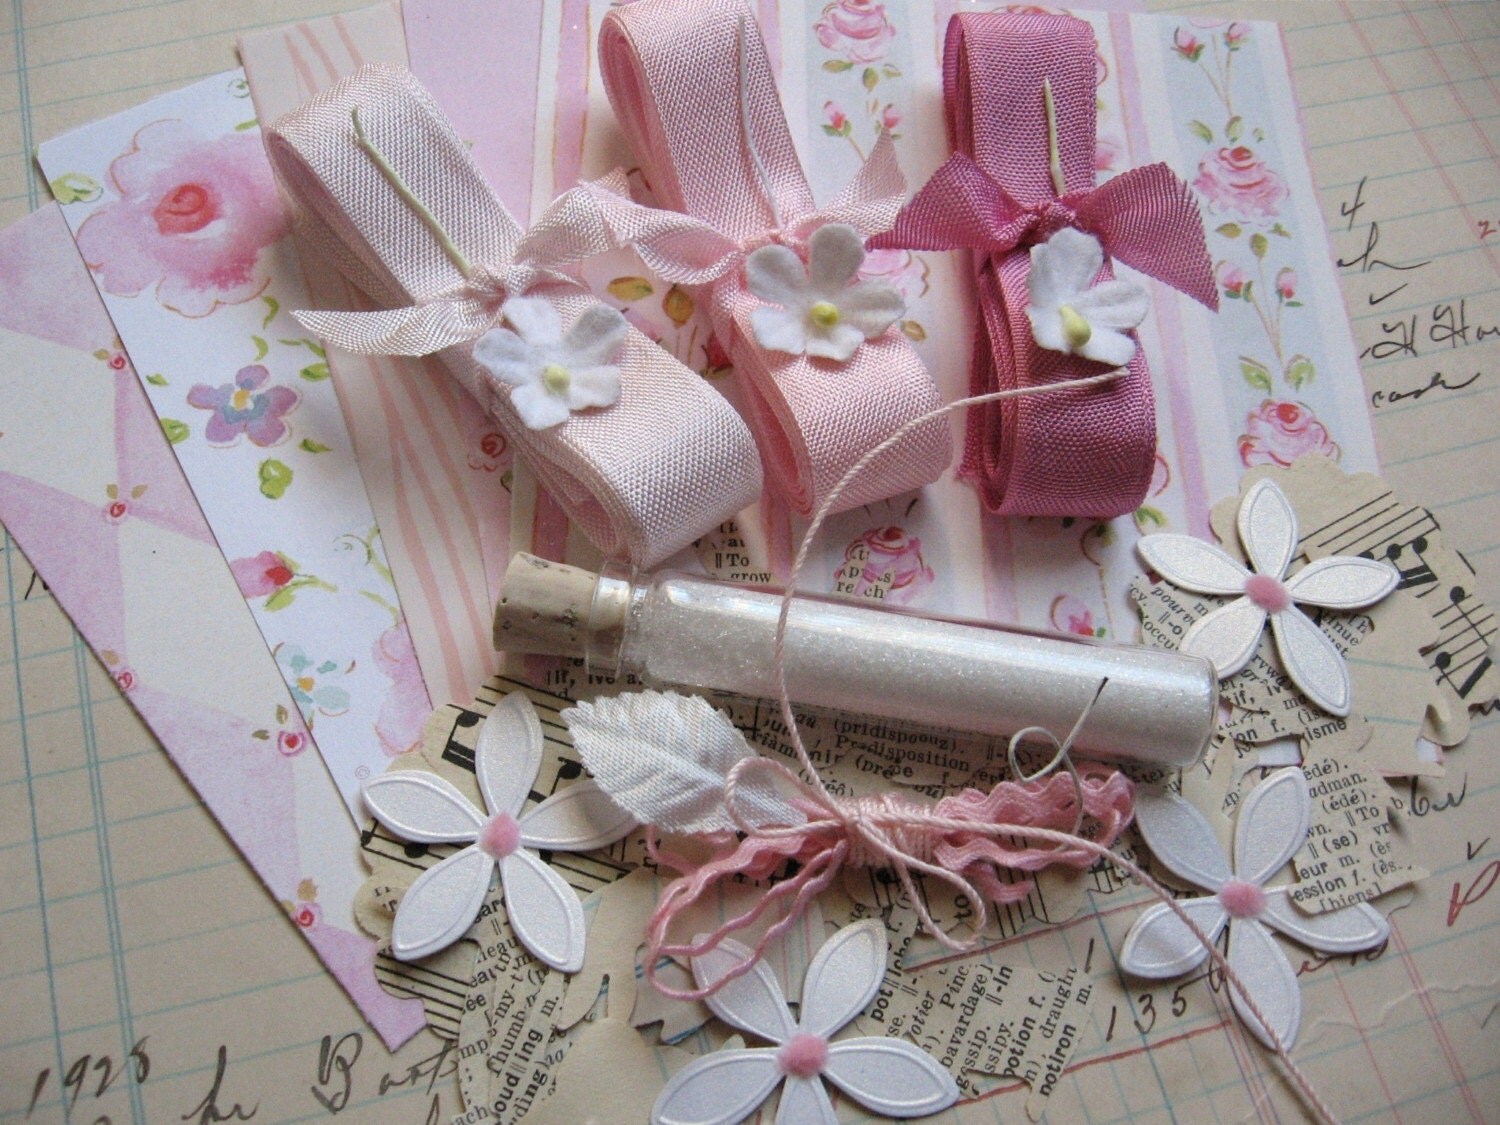 Spring Inspiration Kit -- Seam Binding, Rick Rack, Millinery and More